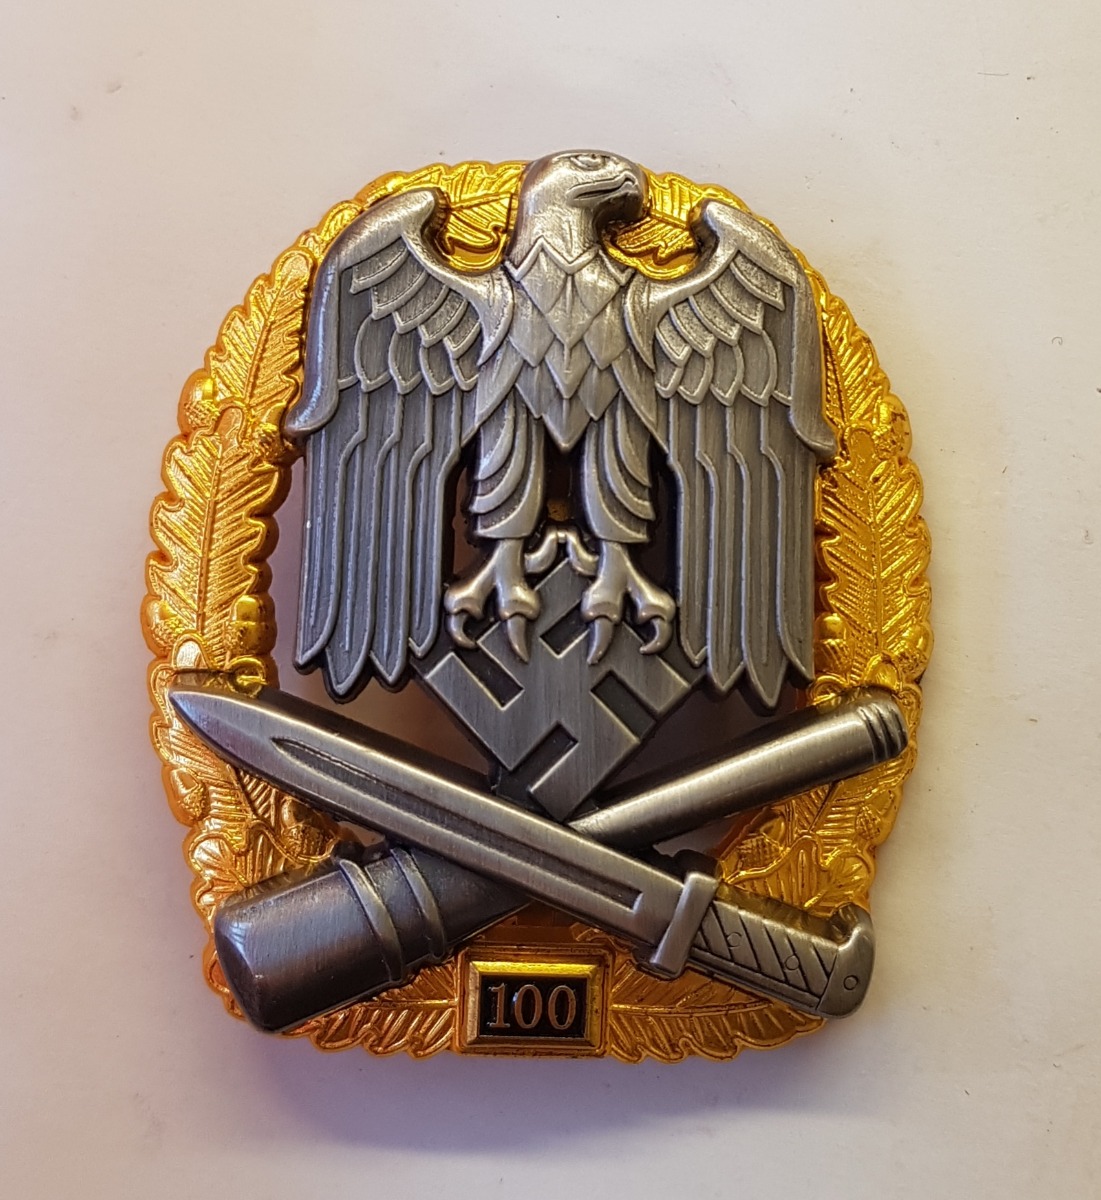 GERMAN GENERAL ASSAULT BADGE 100 Actions - Gold & Silver